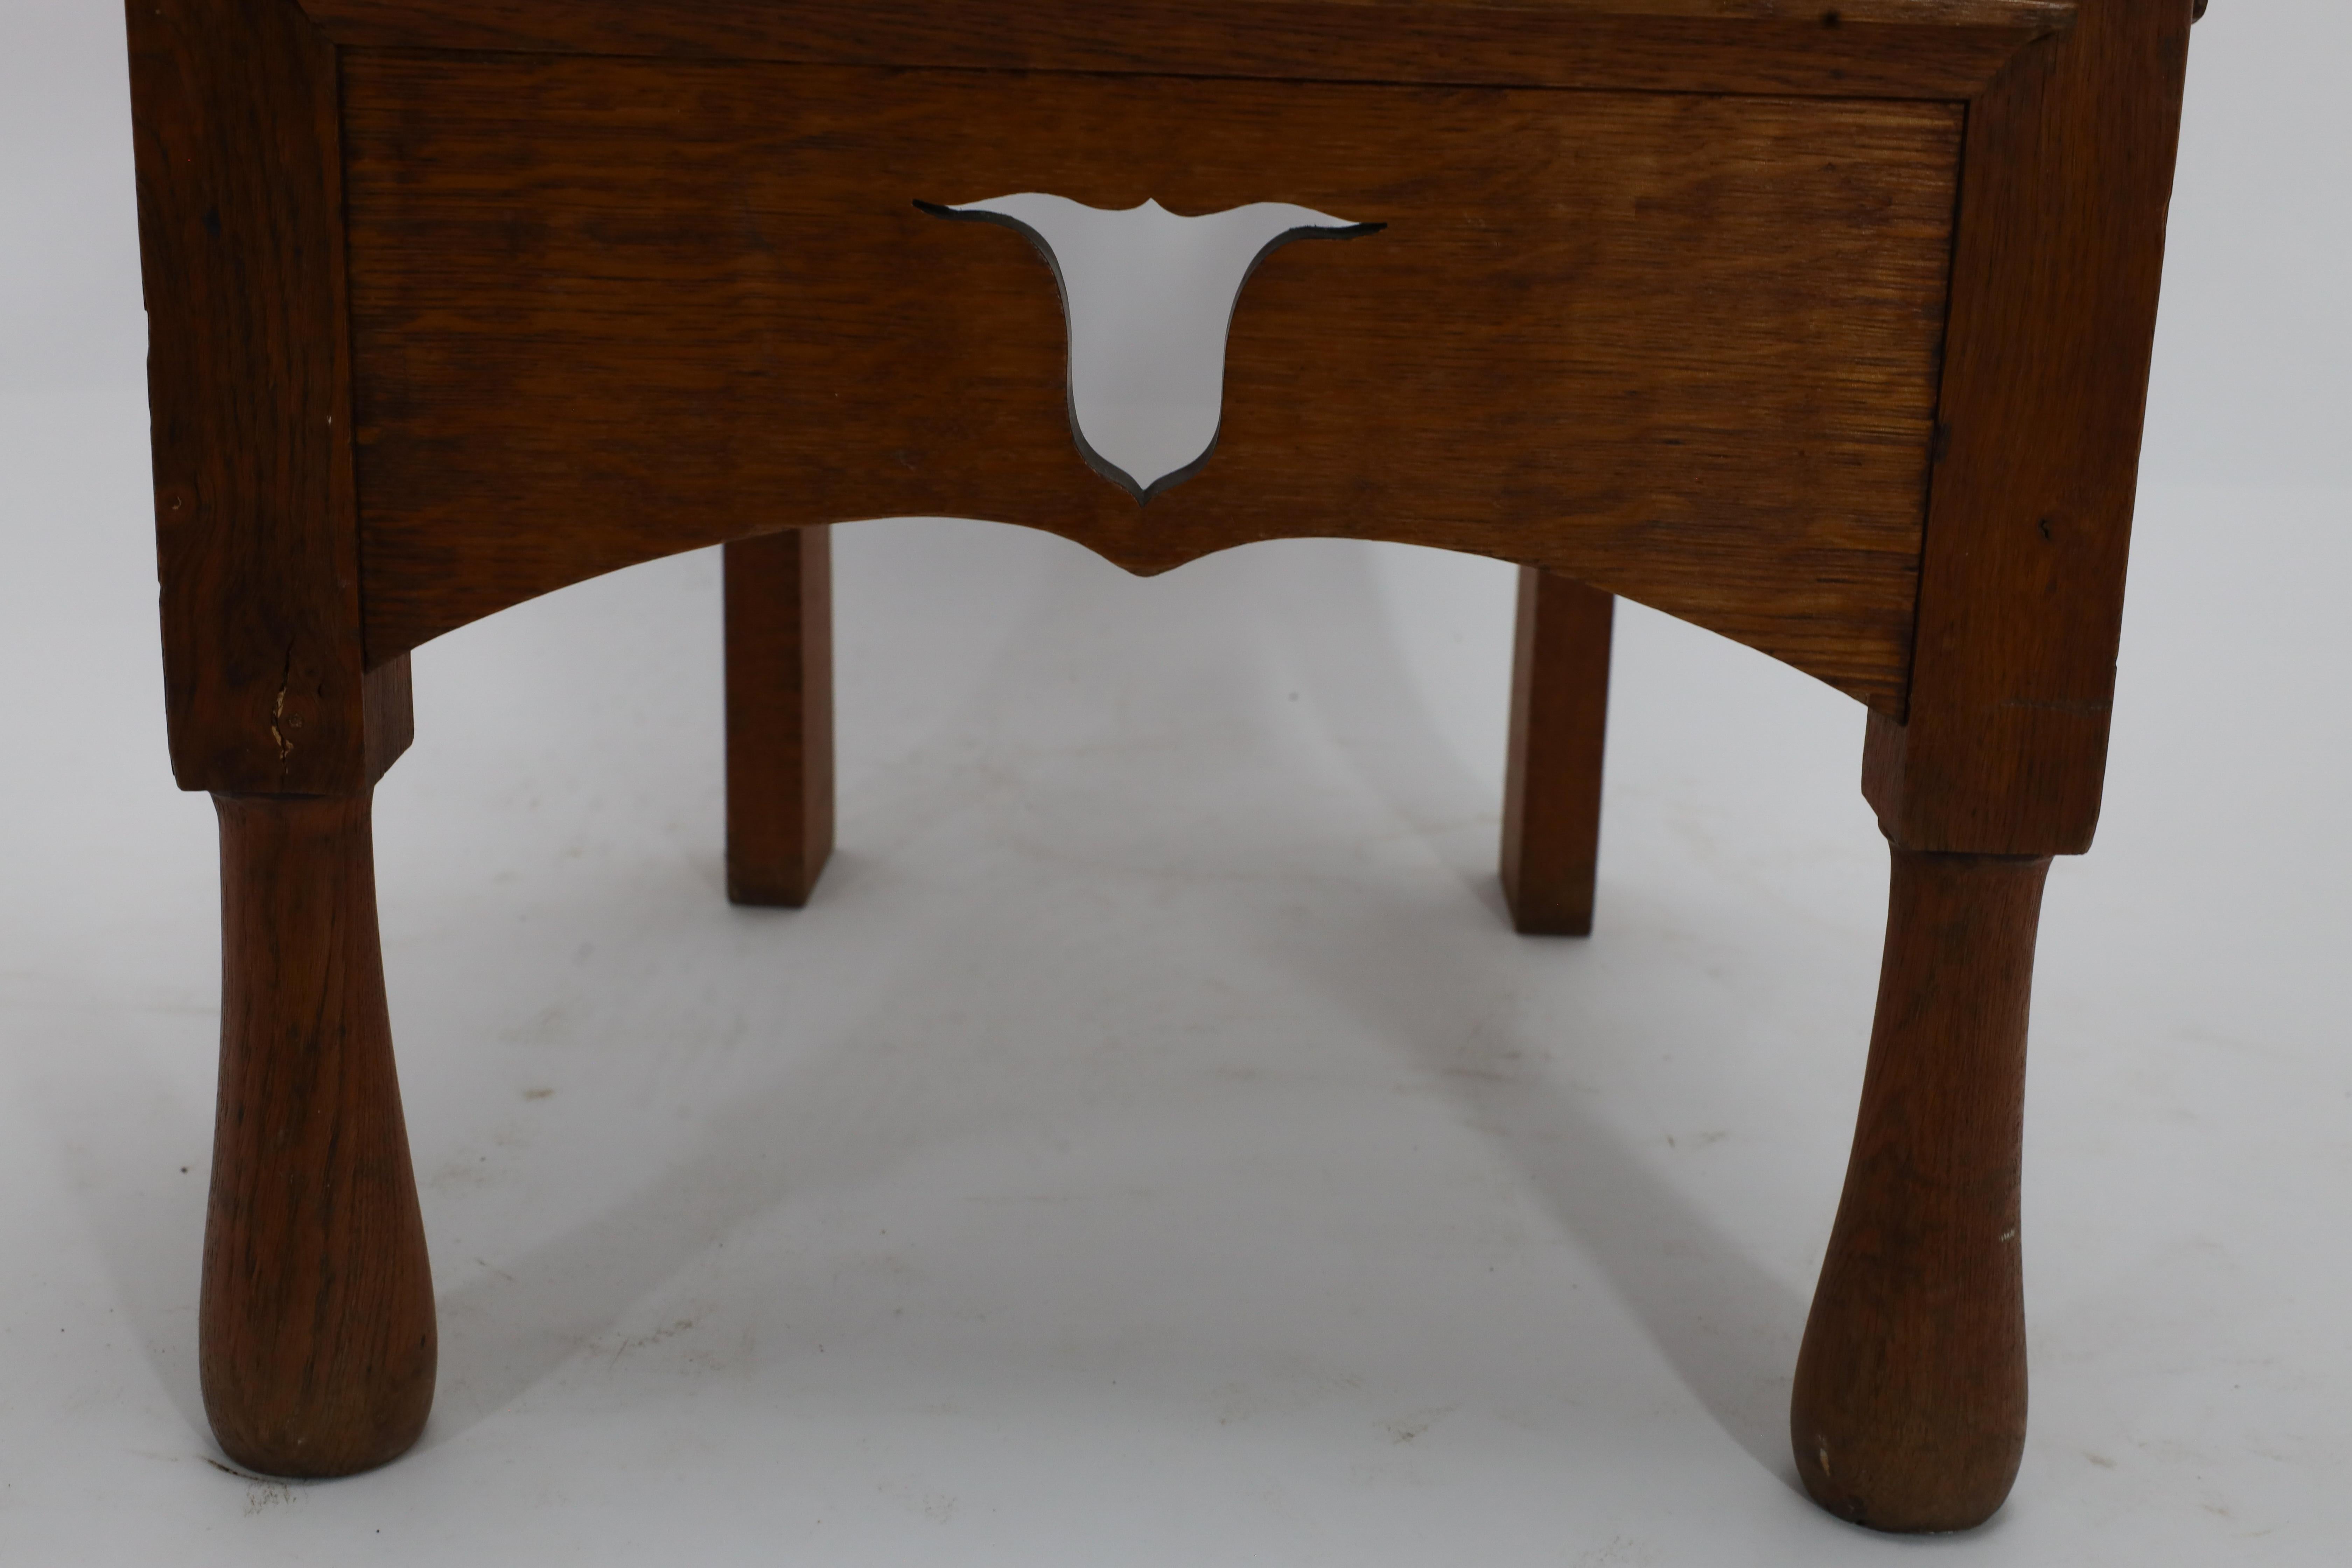 M H Baillie Scott attri An Arts & Crafts Oak Chair With Stylised Floral Cut-Outs For Sale 3